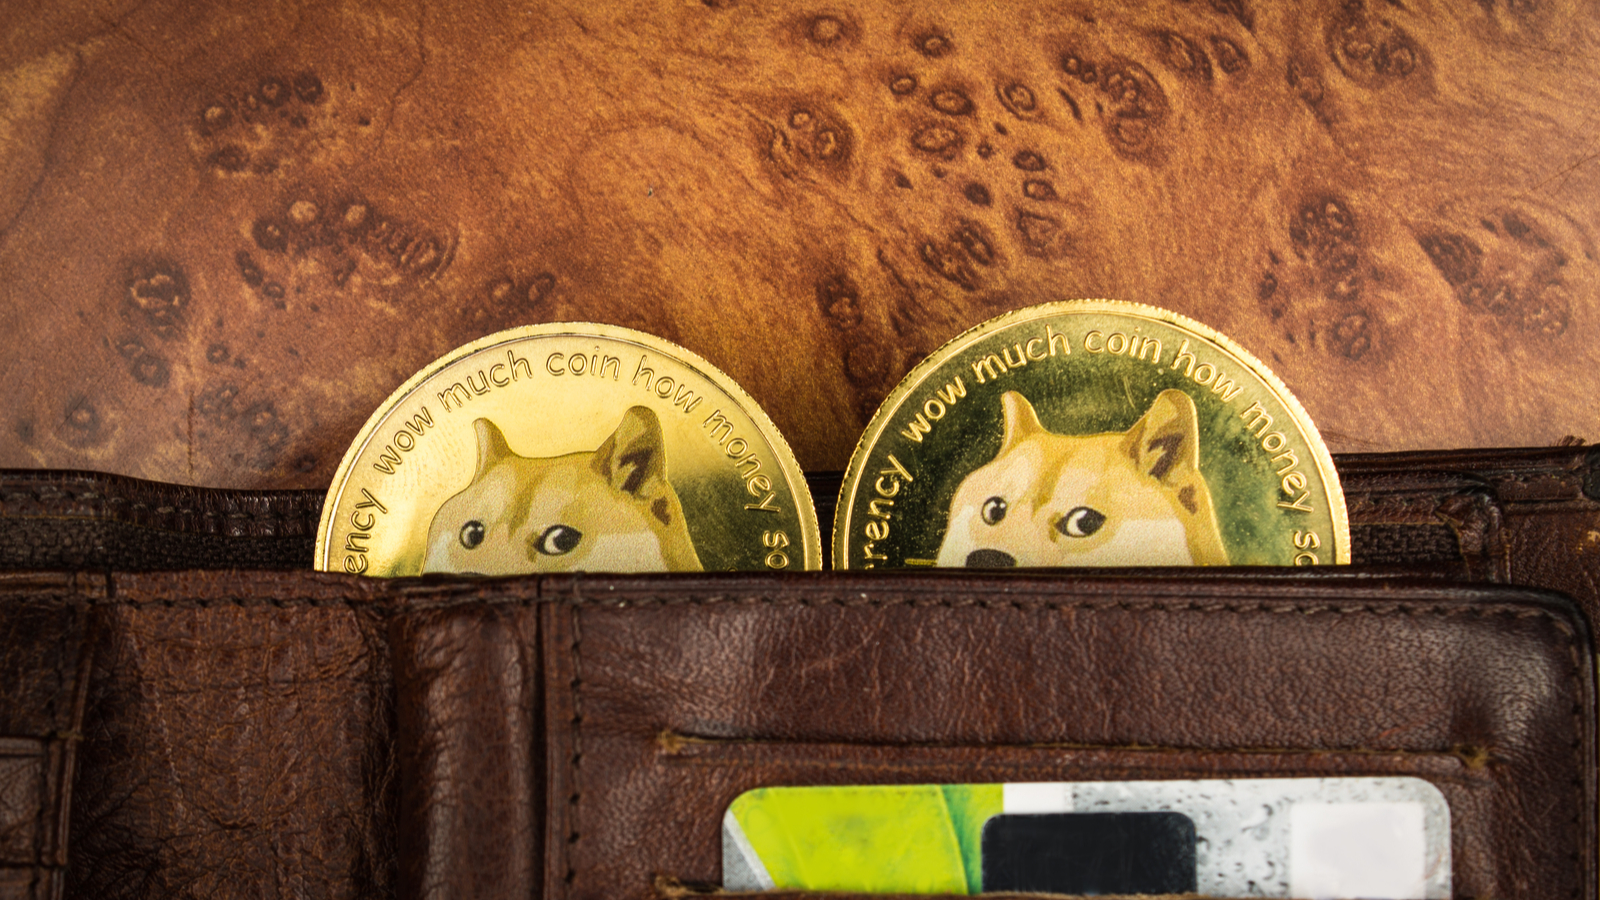 Dogecoin price predictions coins with doge faces peeking out of brown leather wallet. The coins have the words "wow much coin how money" embossed on them.